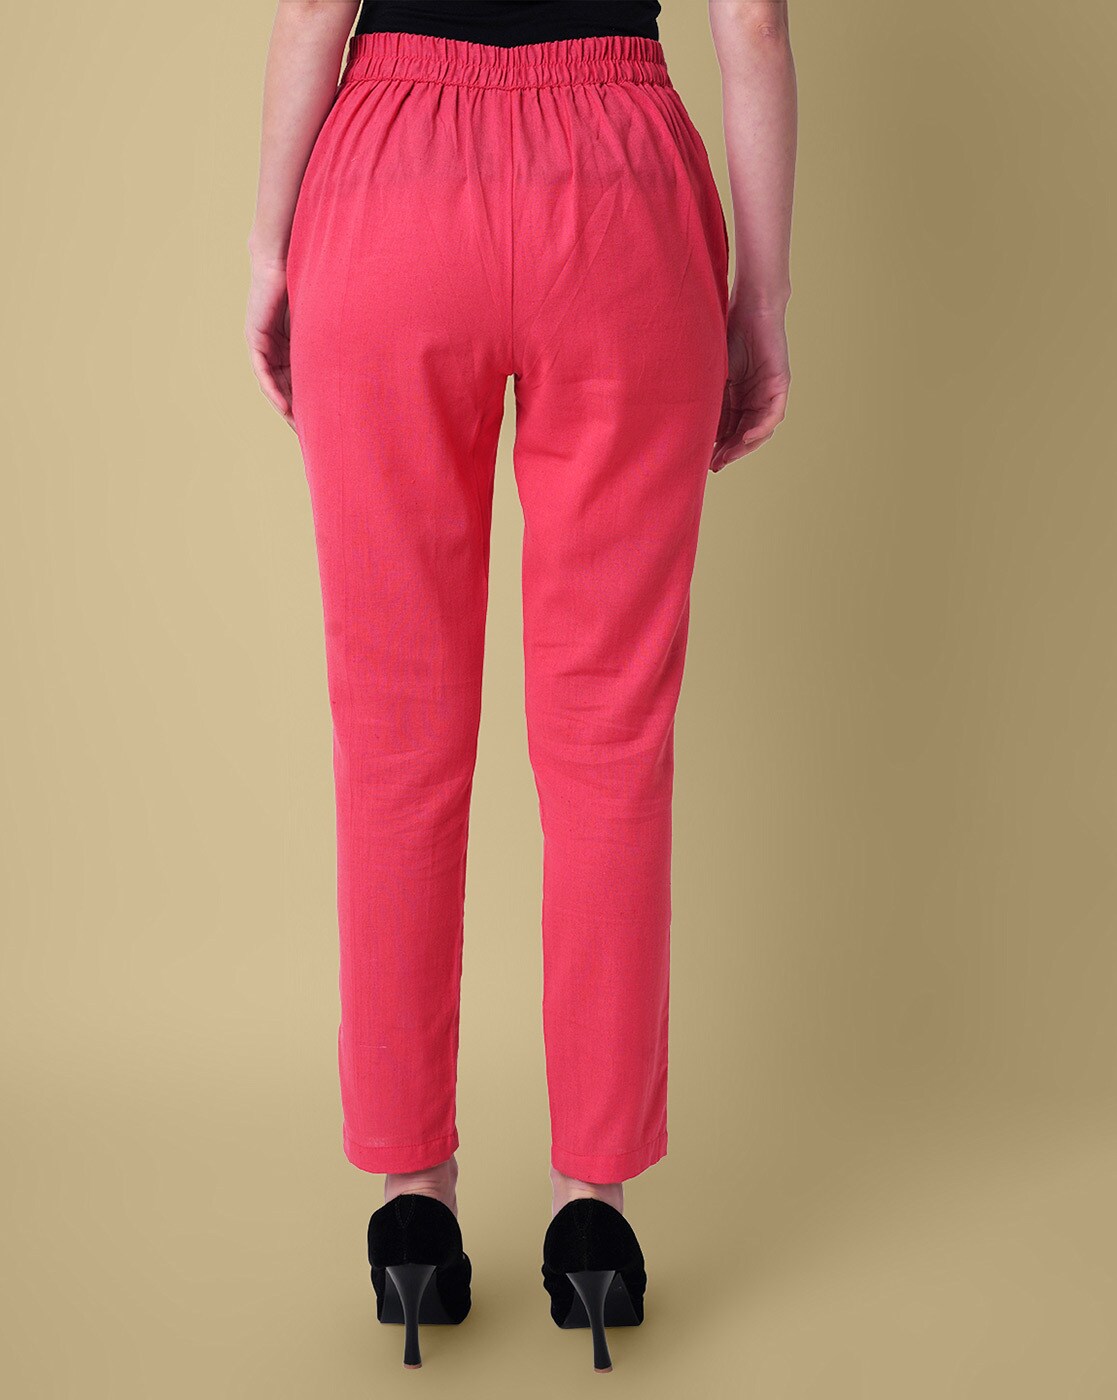 Coral loose fit elastic waistband leisure pants